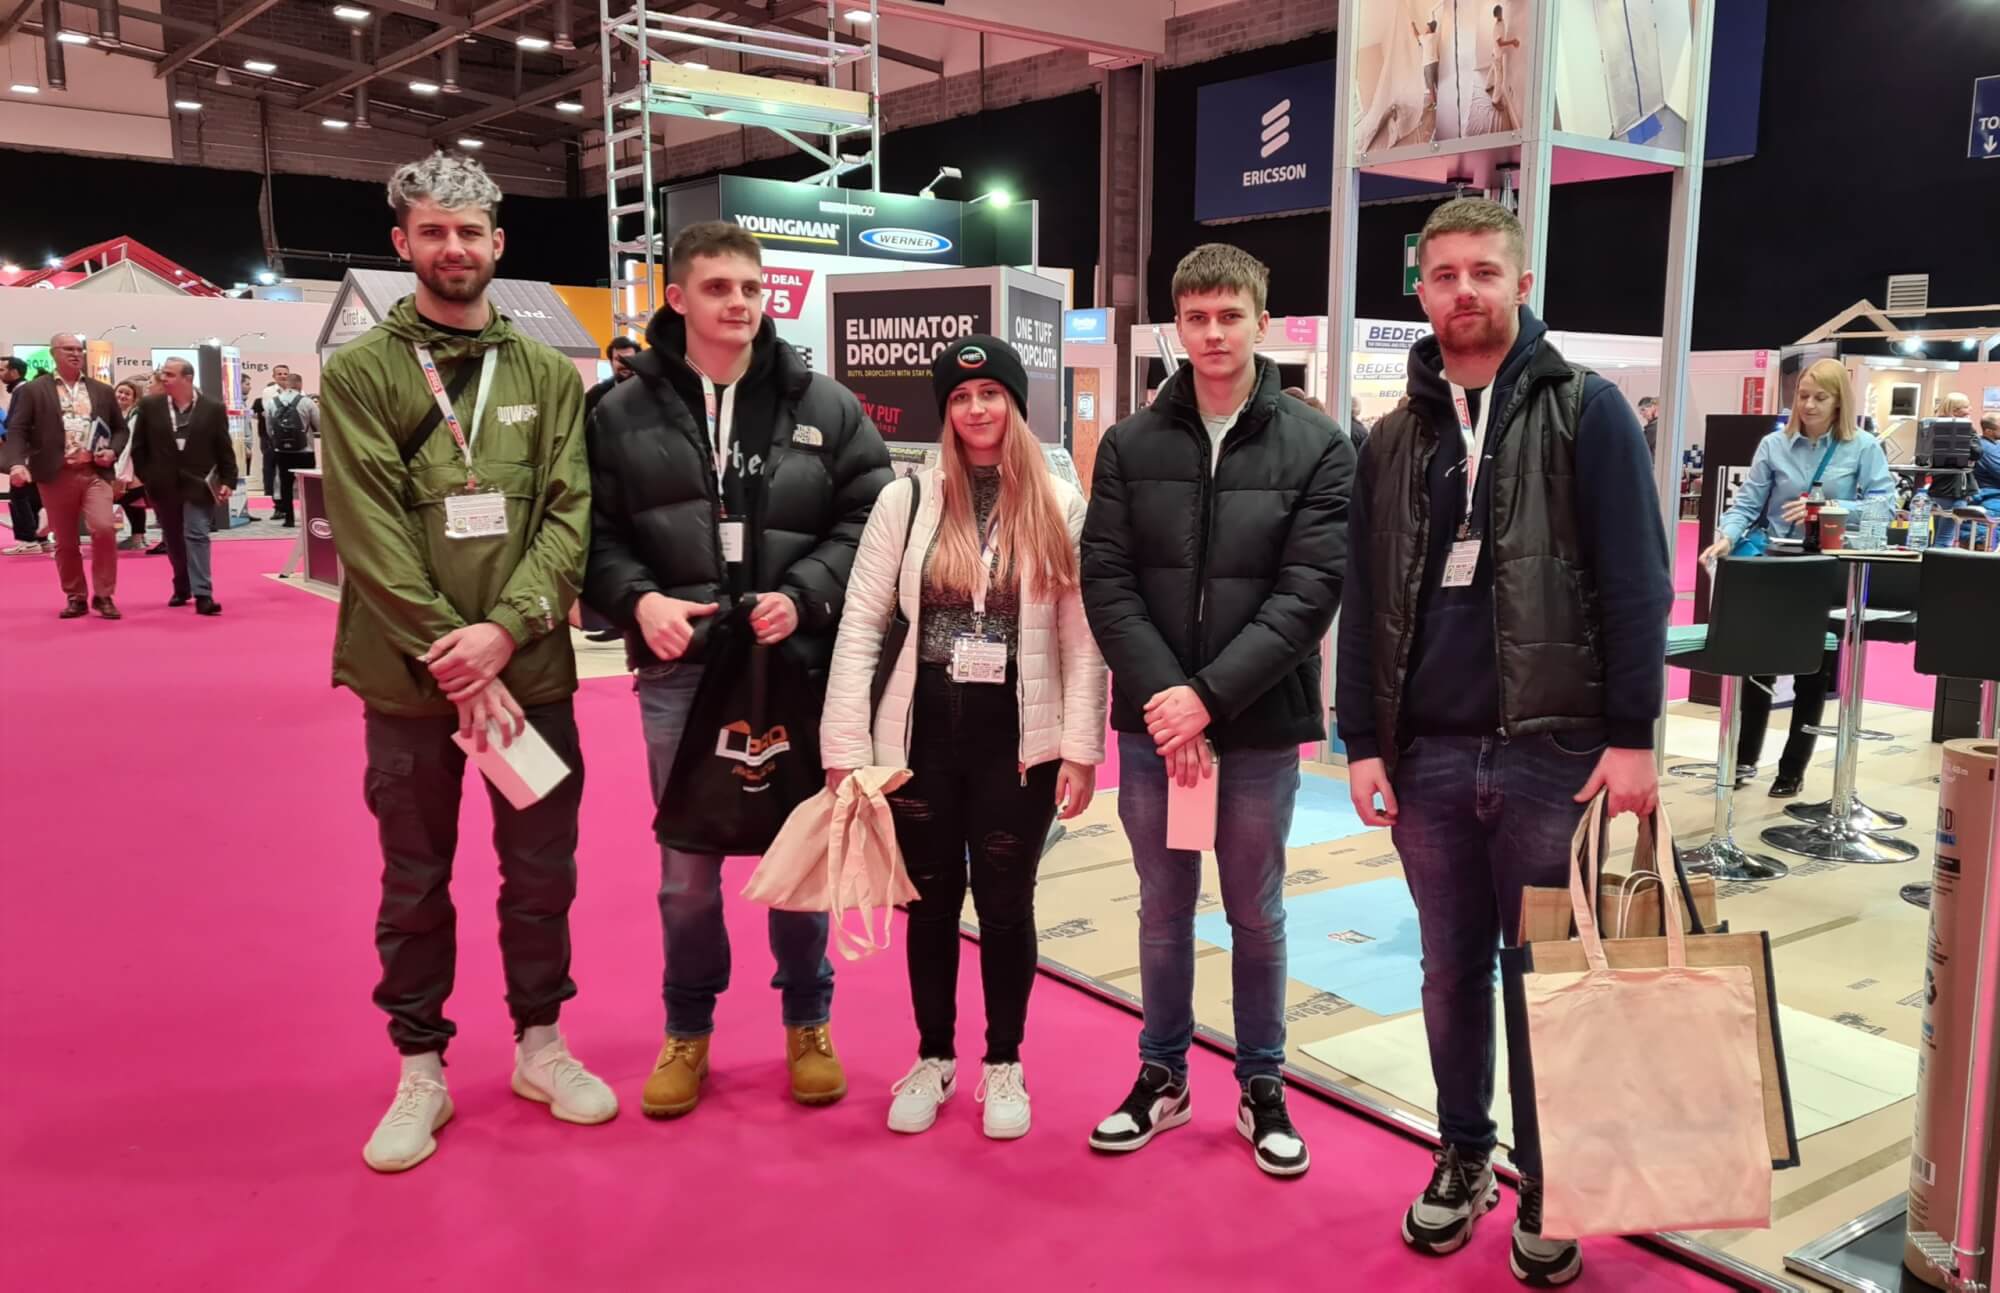 Learners at the national painting and decorating show